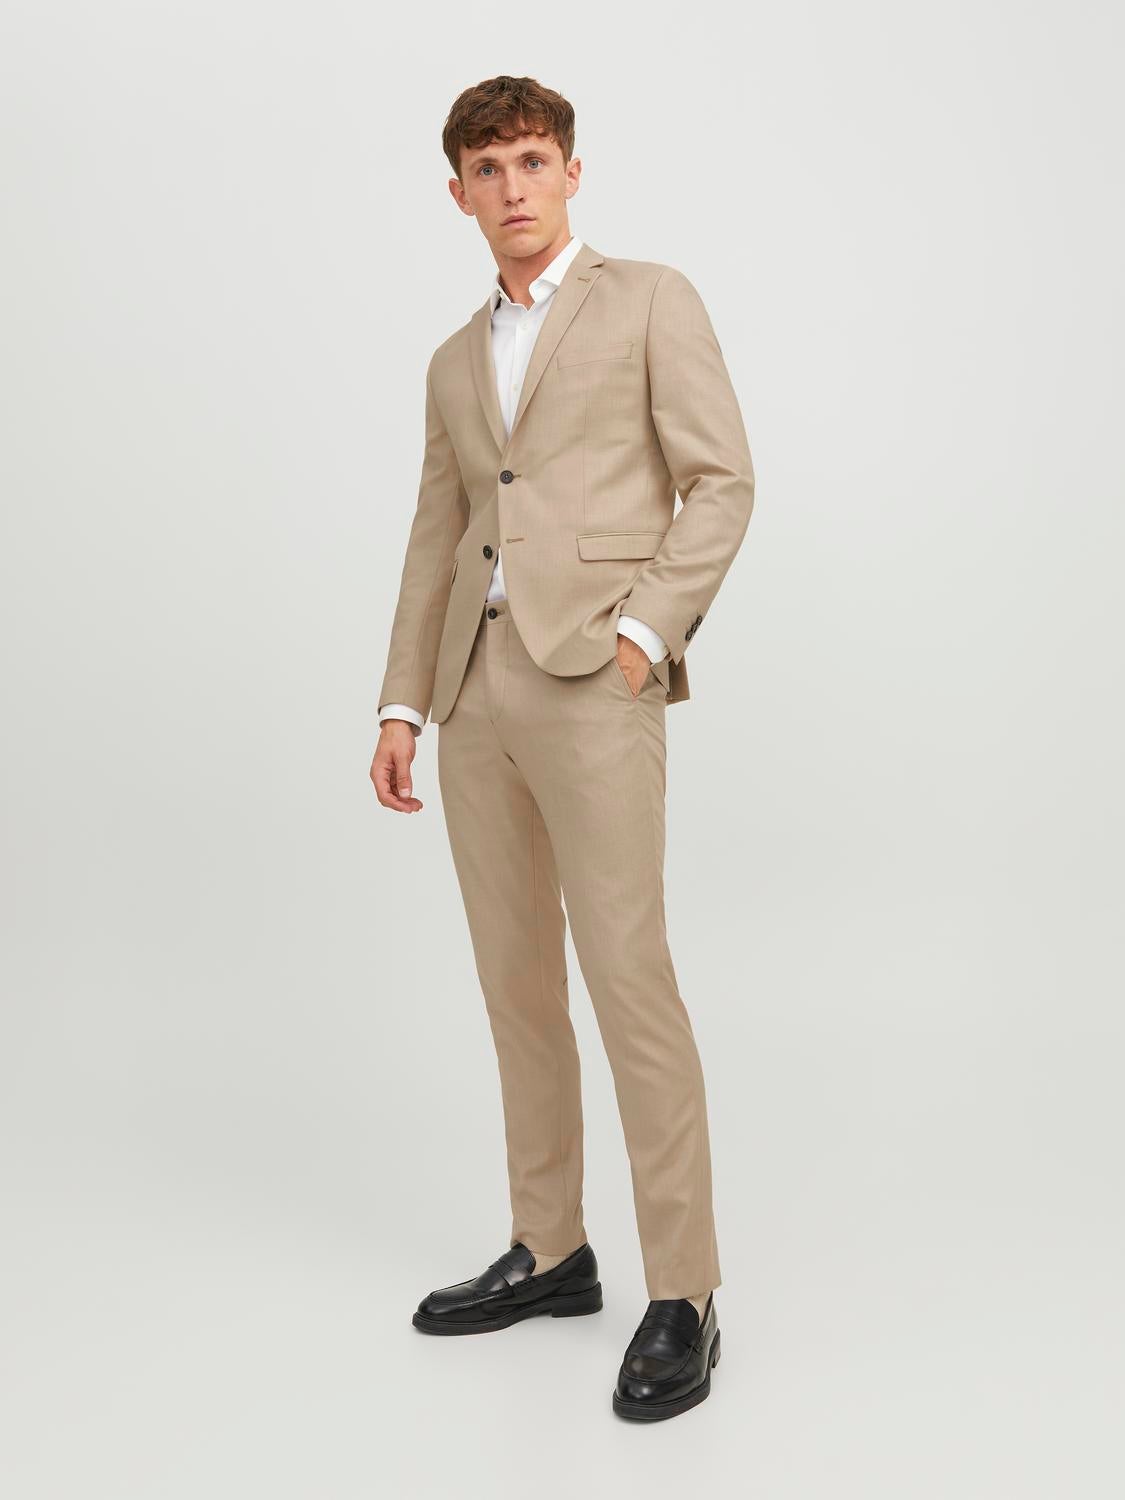 Slim fit suit trousers made from recycled materials | Men's trousers |  Cortefiel